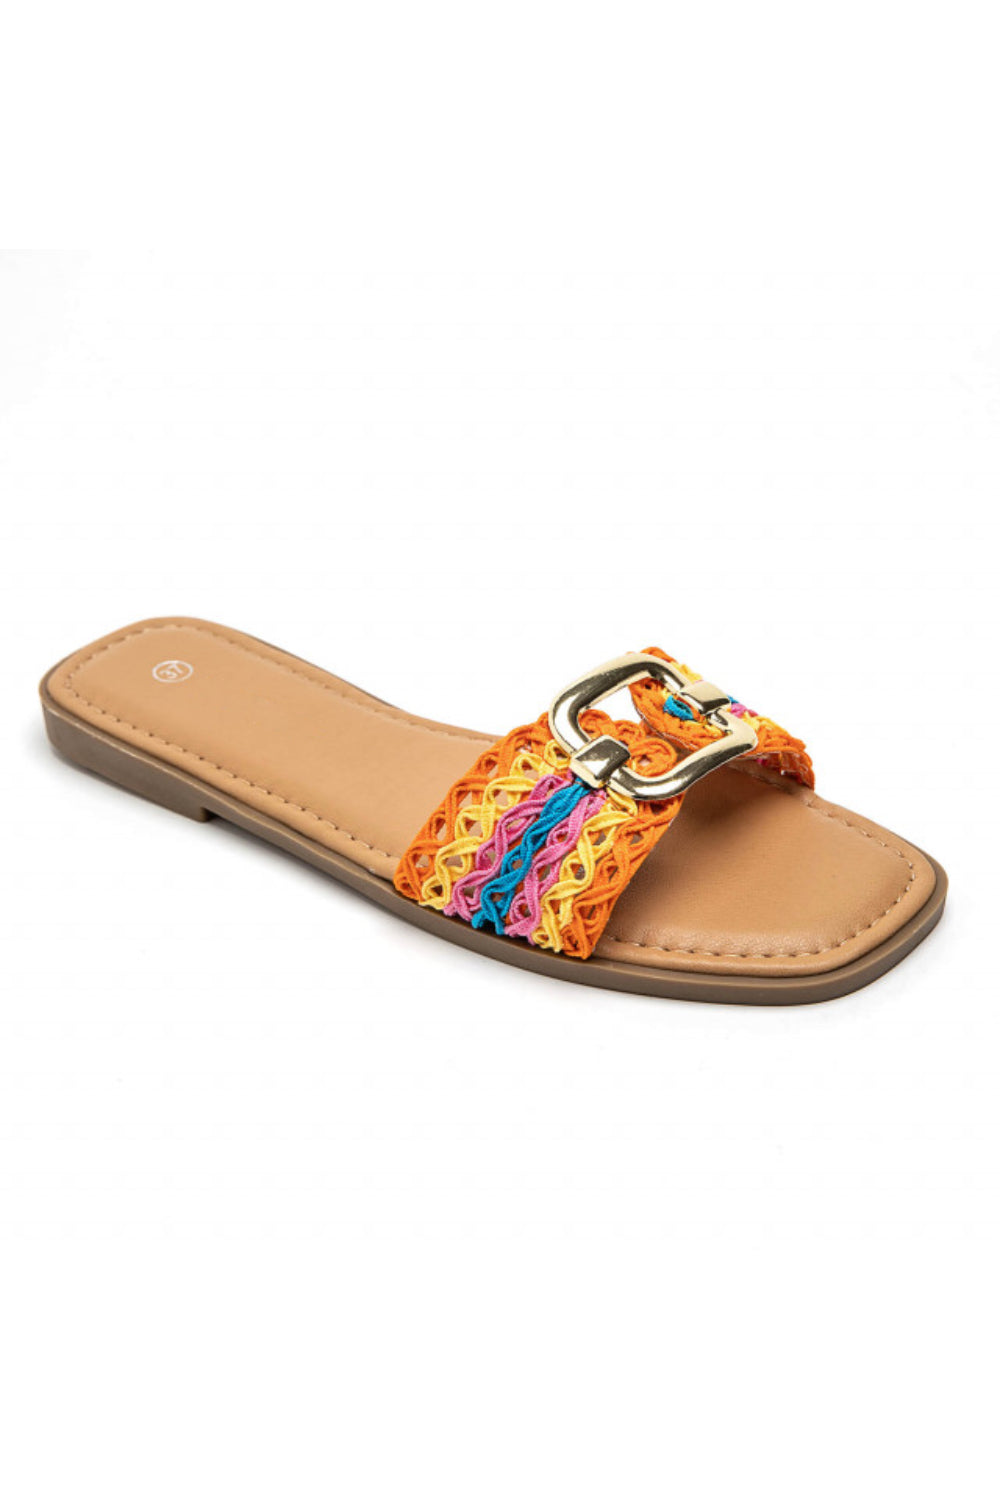 MULTI COLOUR NETTED BUCKLE DETAIL FLAT SANDALS